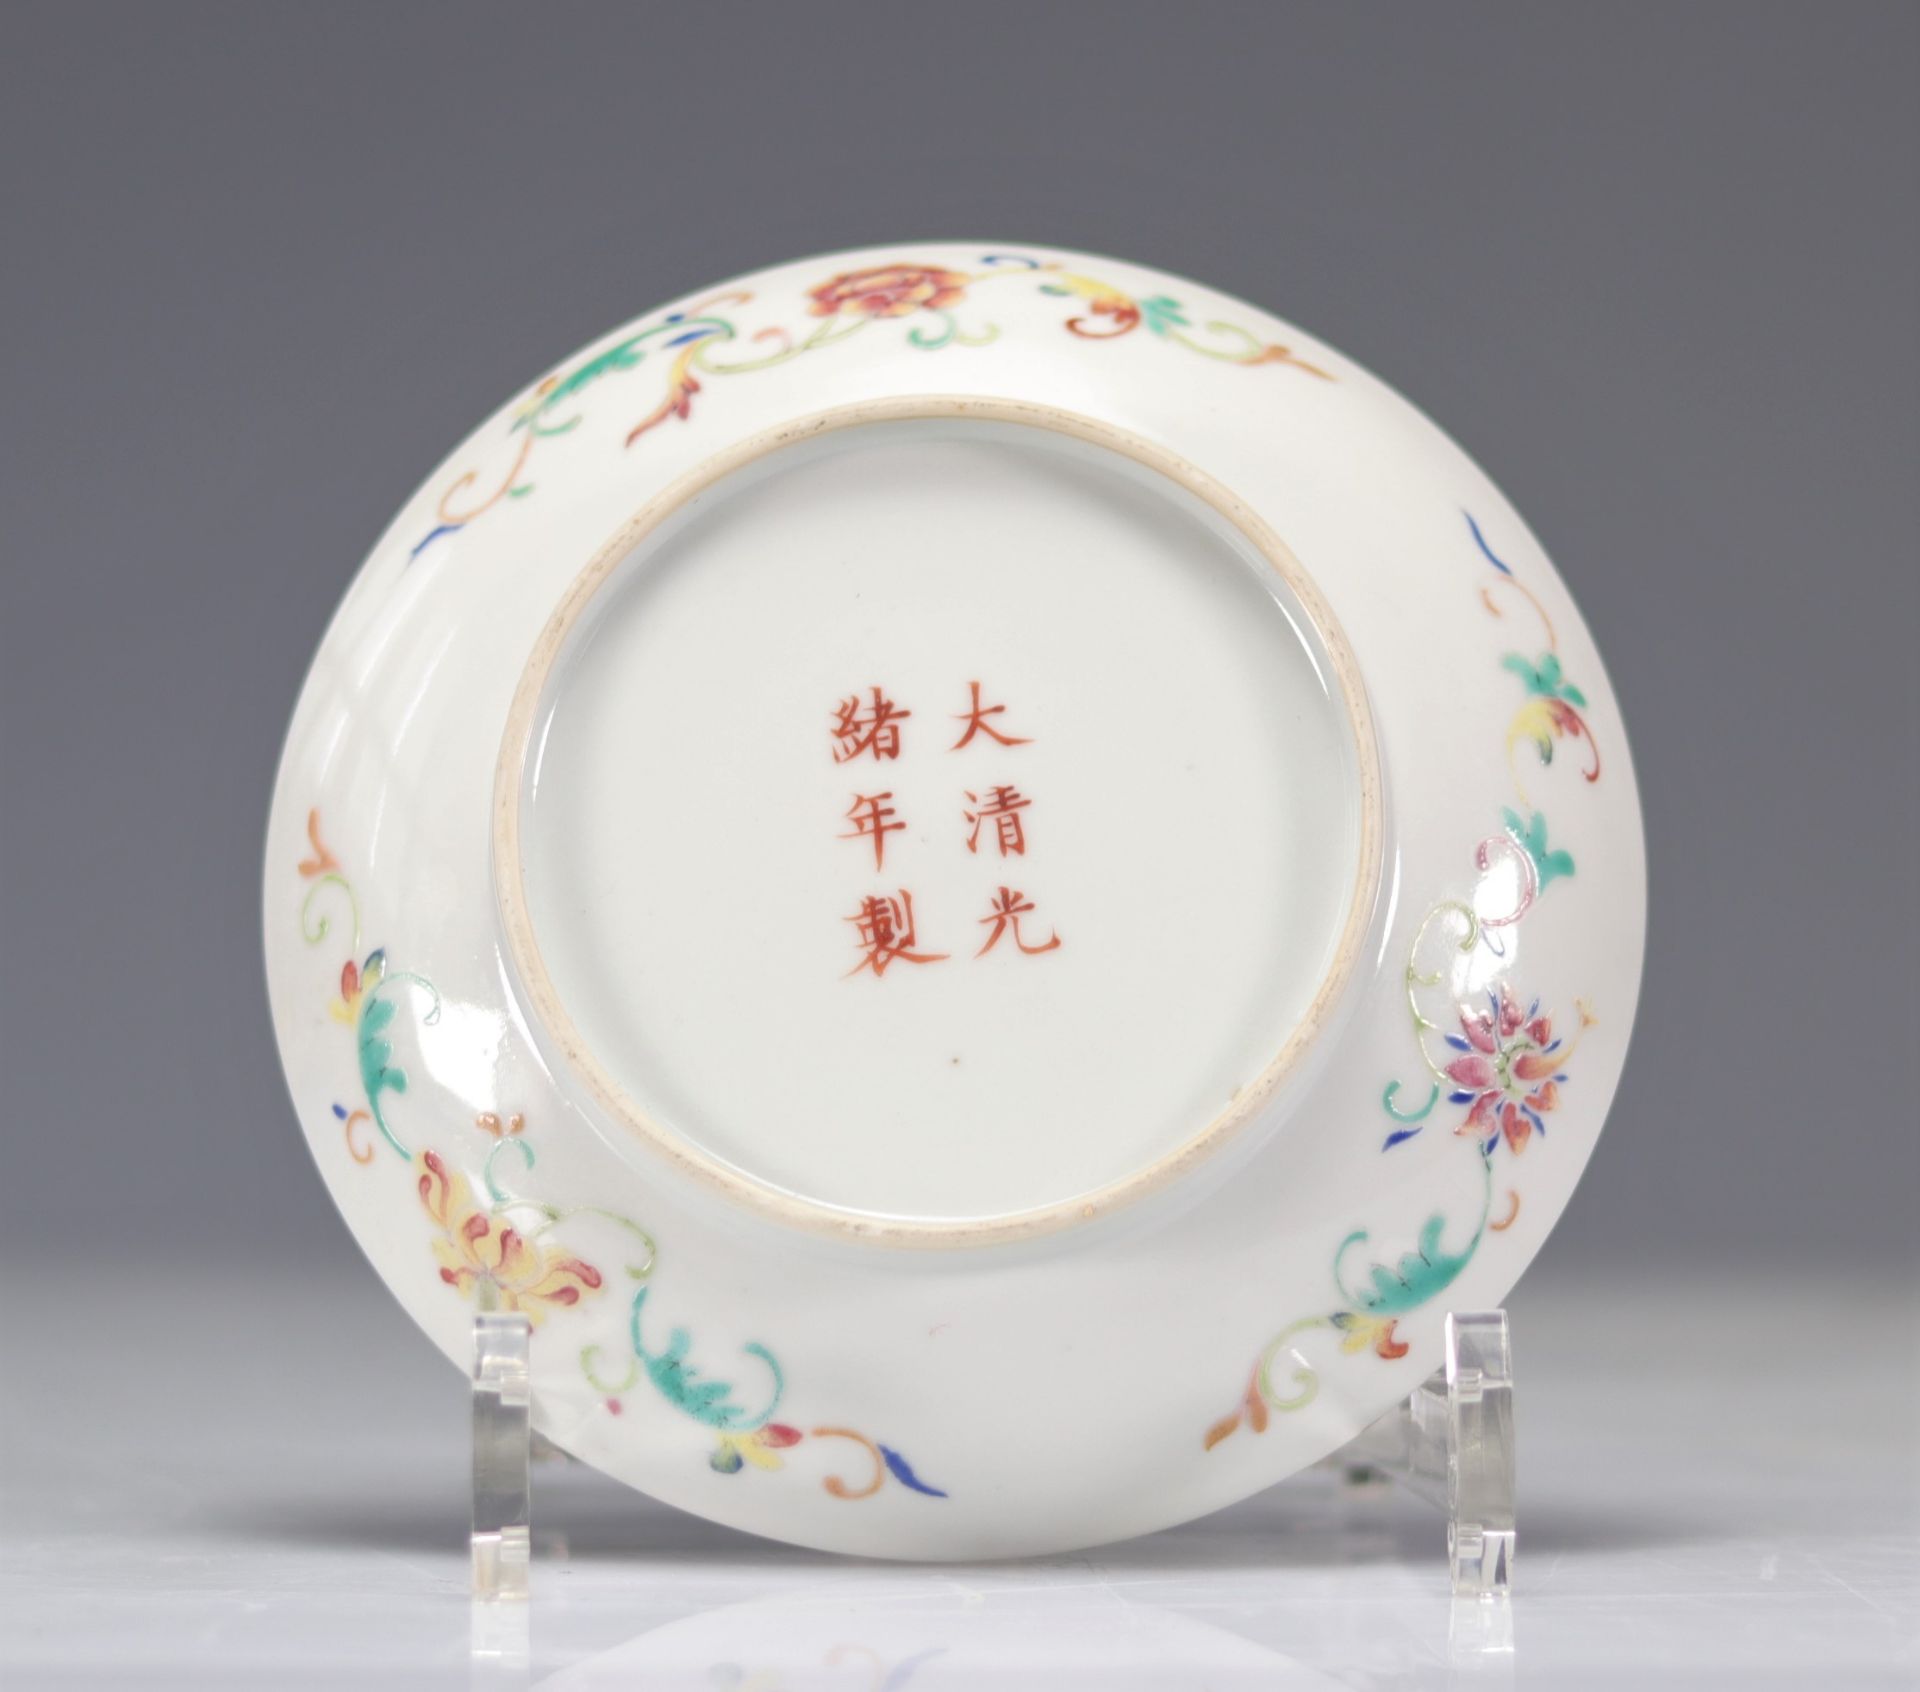 Small Chinese porcelain plate decorated with peaches - Image 2 of 2